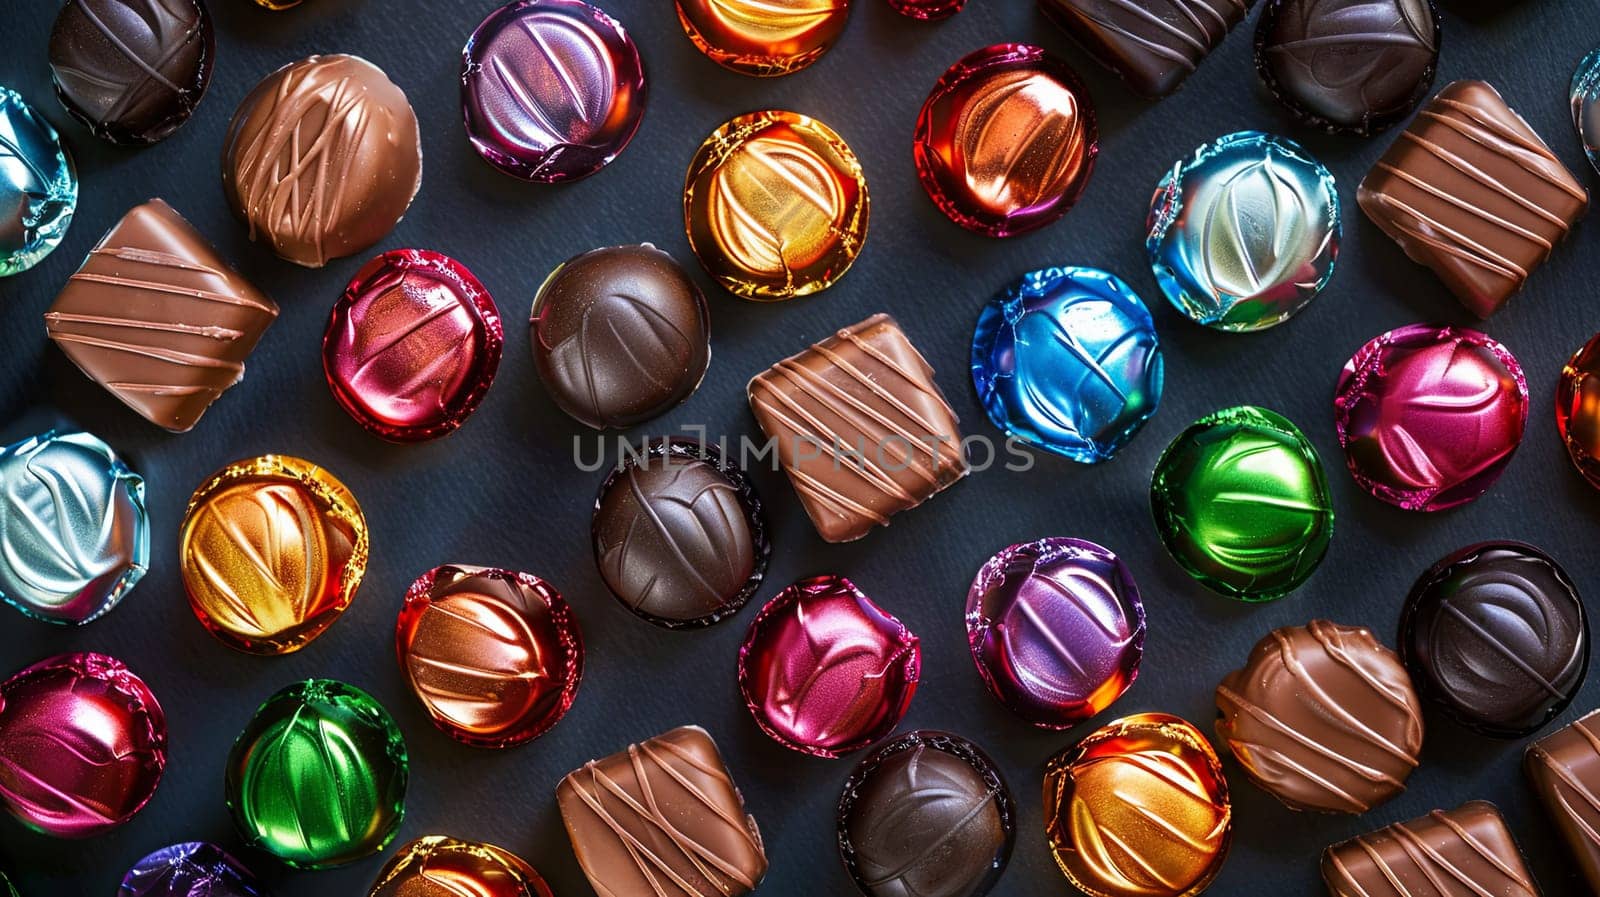 Various types of colorful chocolates in shiny wrappers spread out on a table.